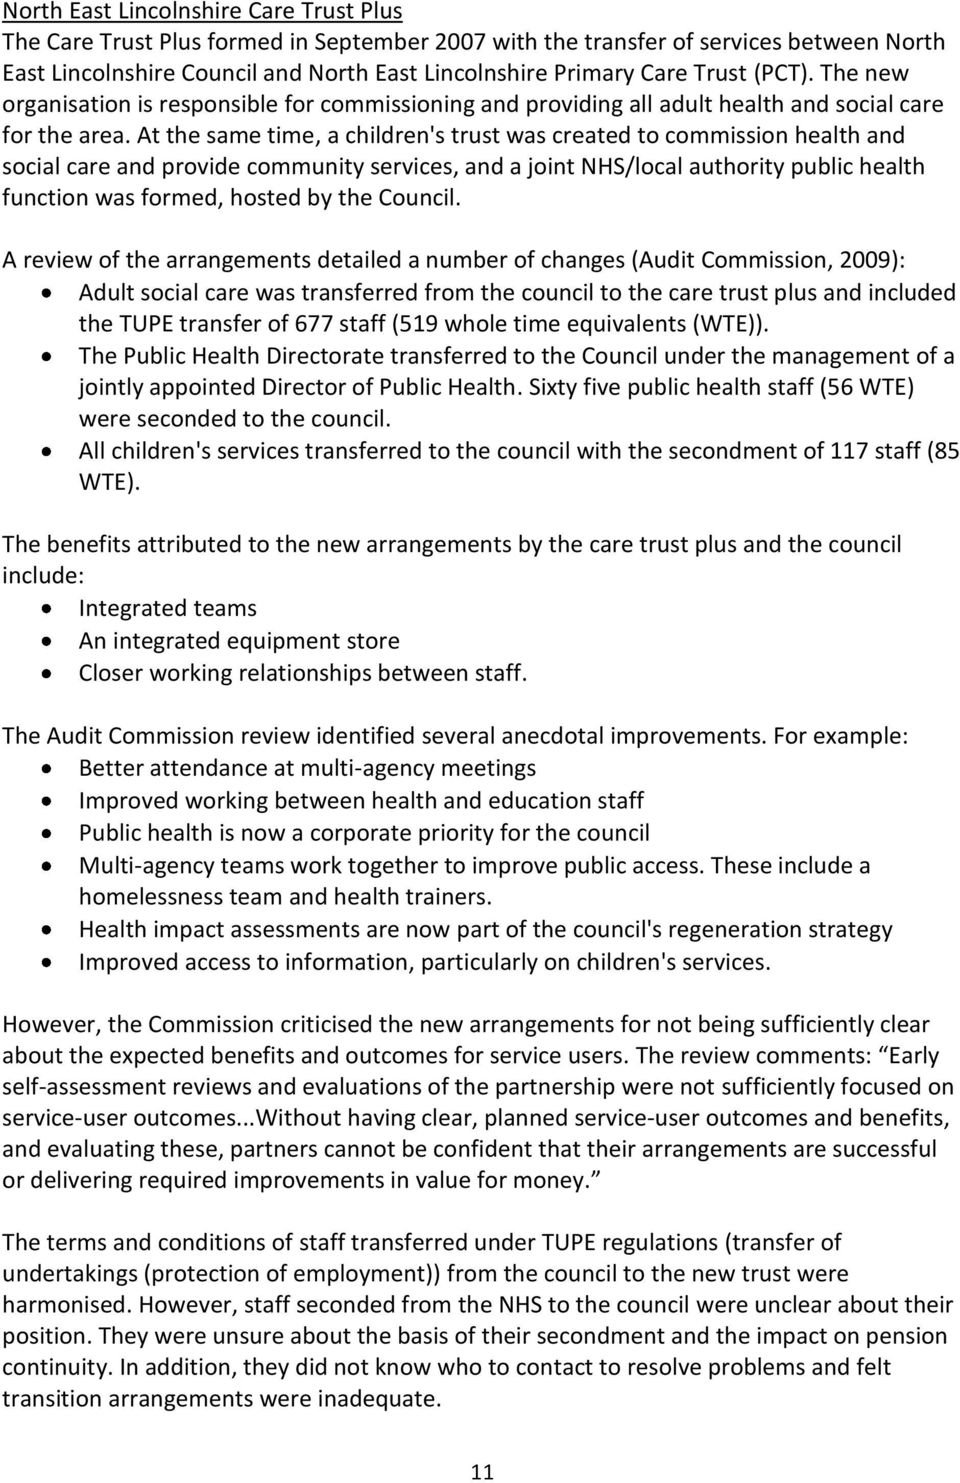 benefits of multi agency working in health and social care